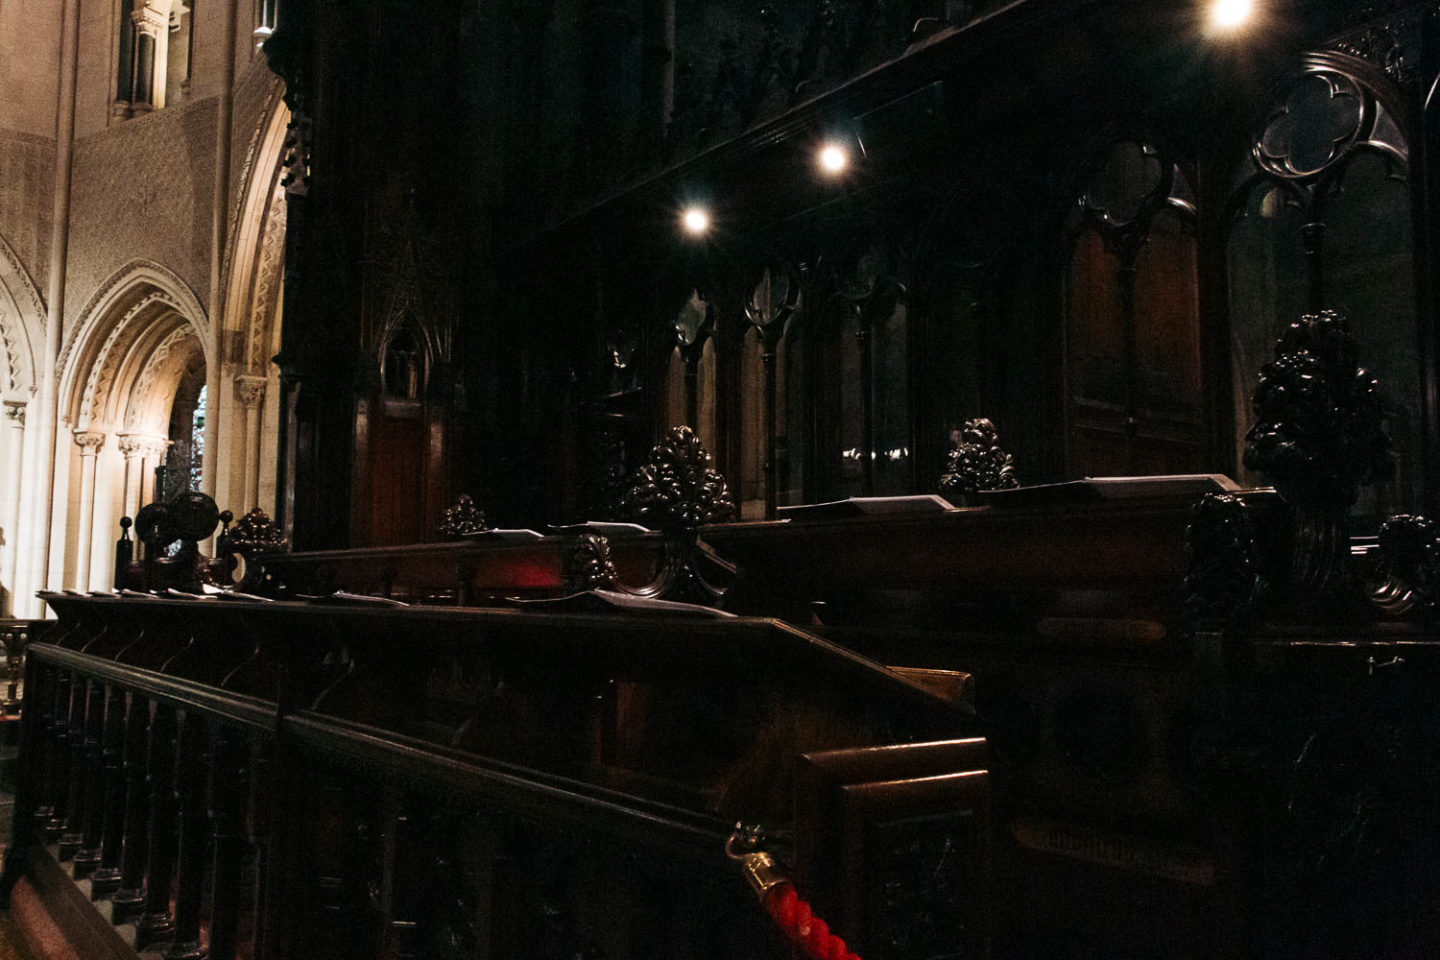 A guide to visiting Christ Church Cathedral in Dublin - Roads and Destinations